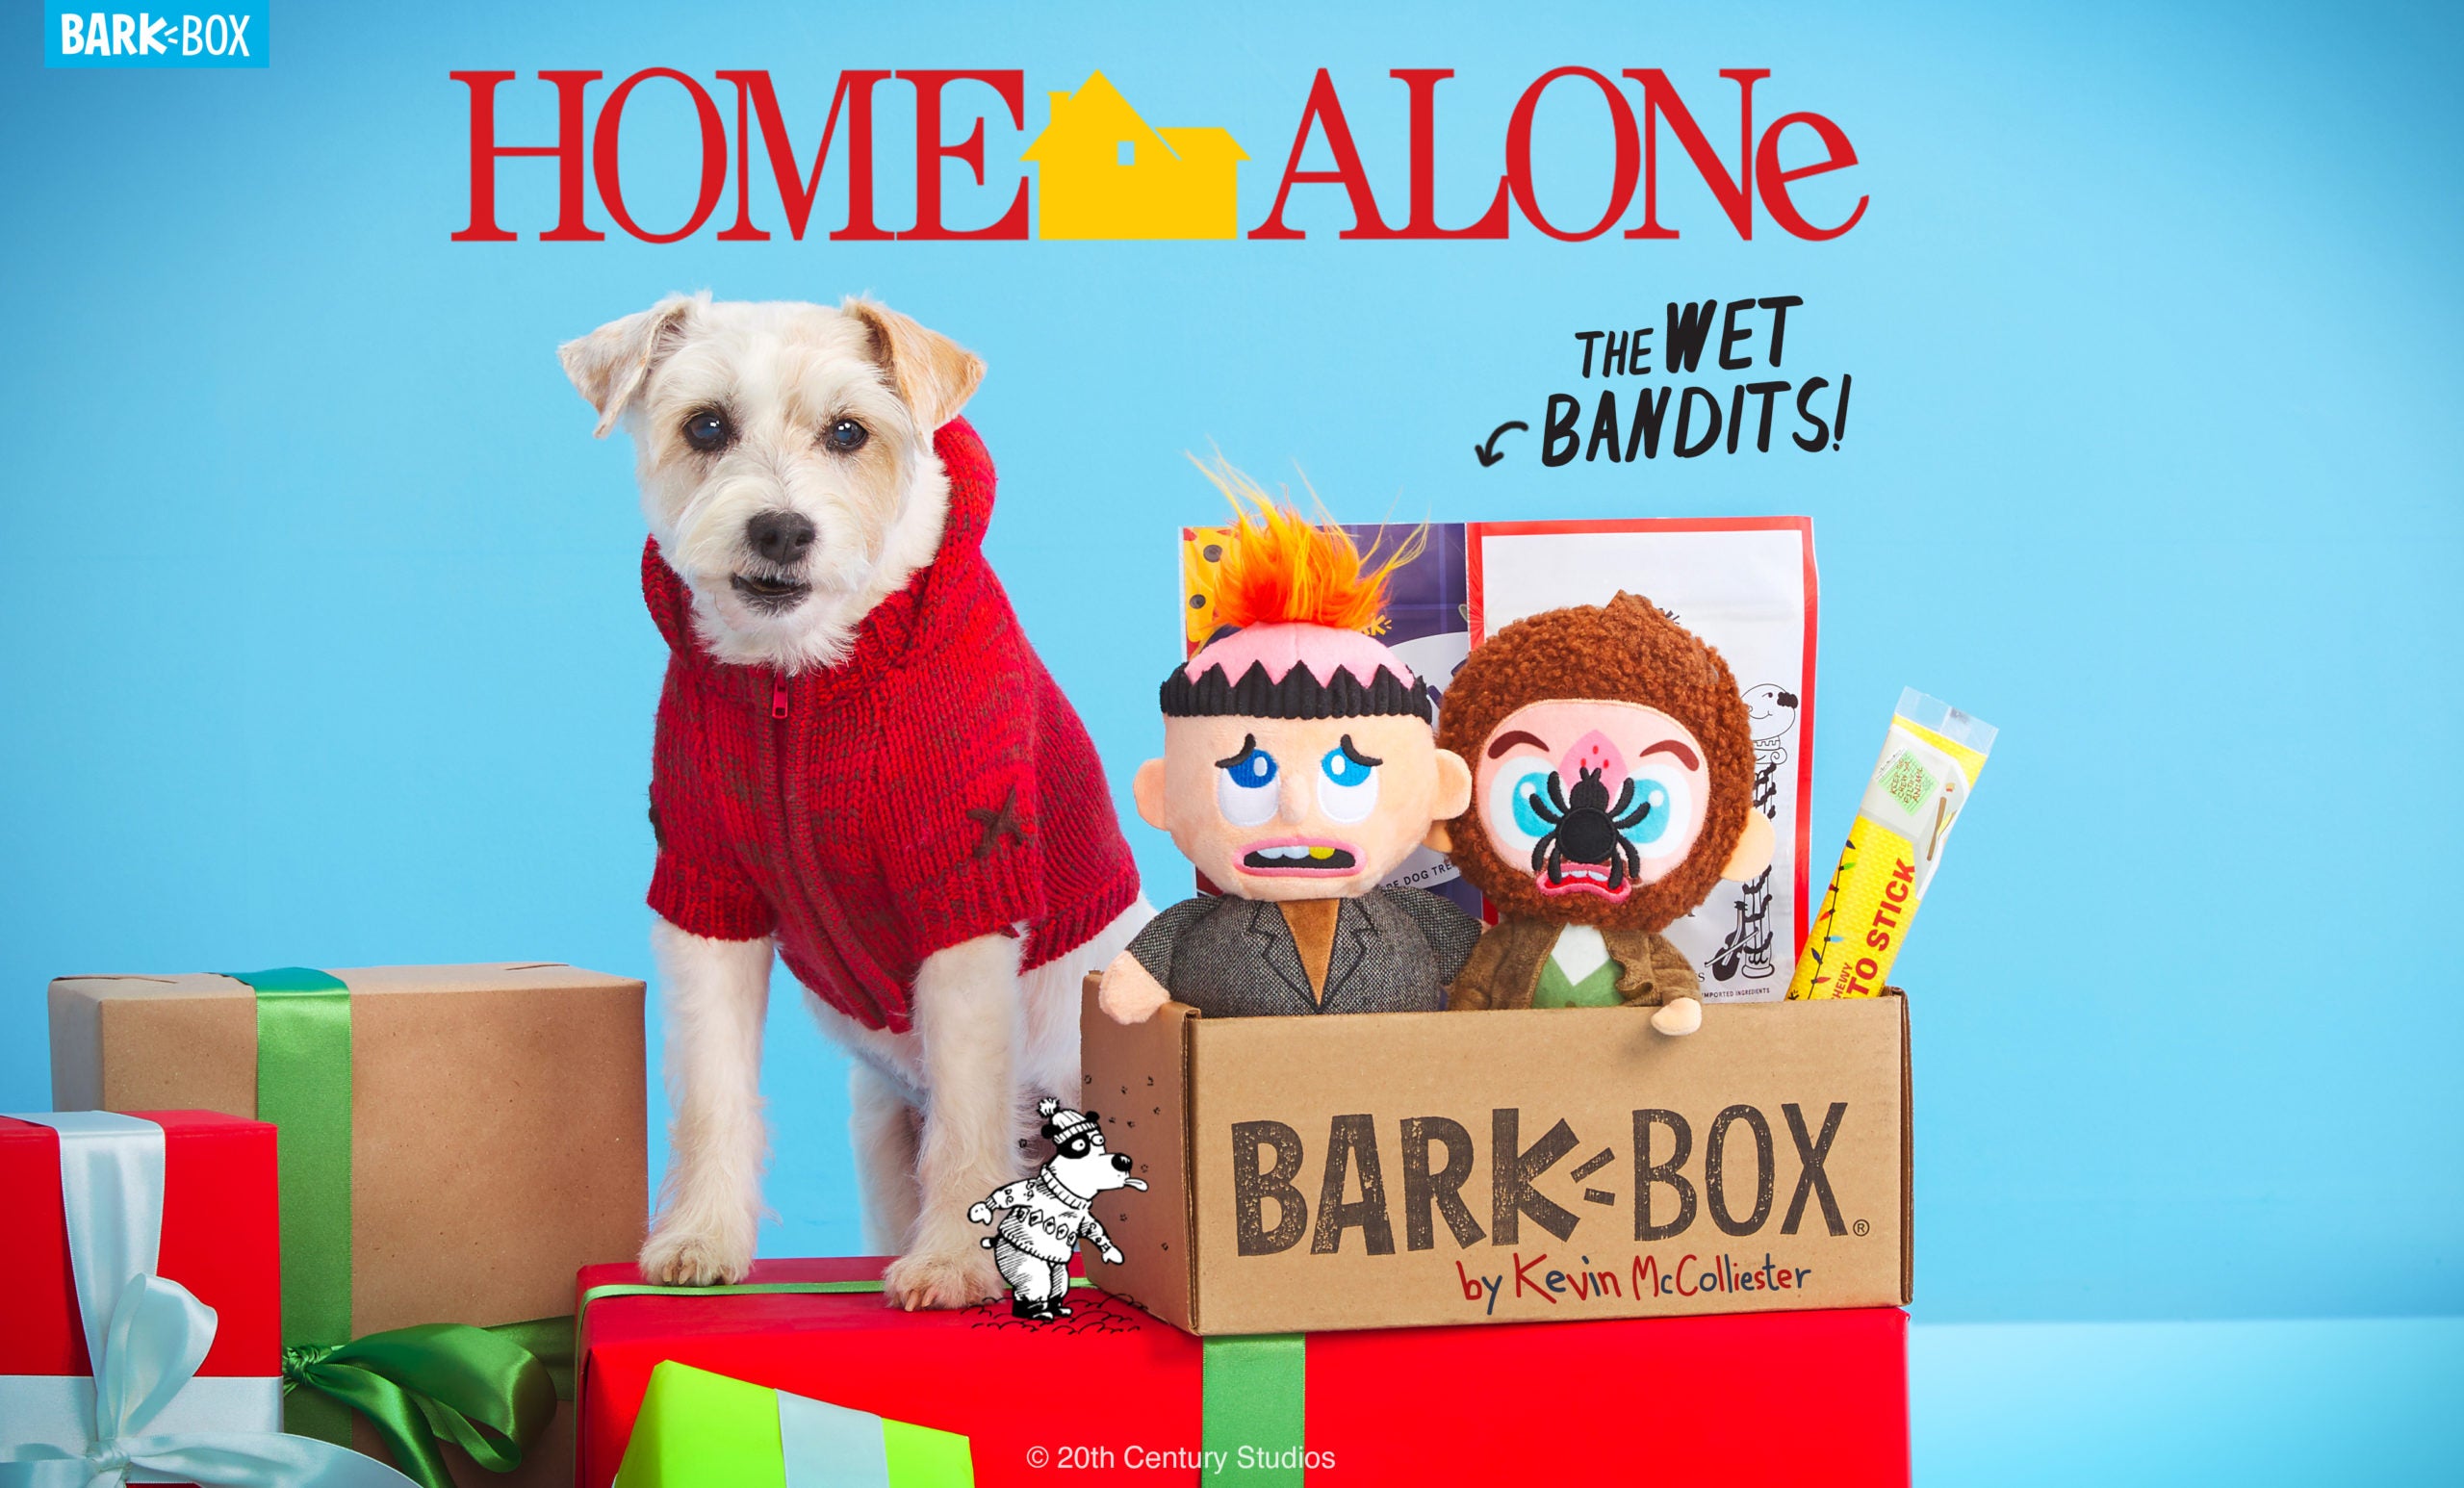 Keep the Change, Ya Filthy Animal! BarkBox and Super Chewer are Launching Limited Edition “Home Alone” Boxes